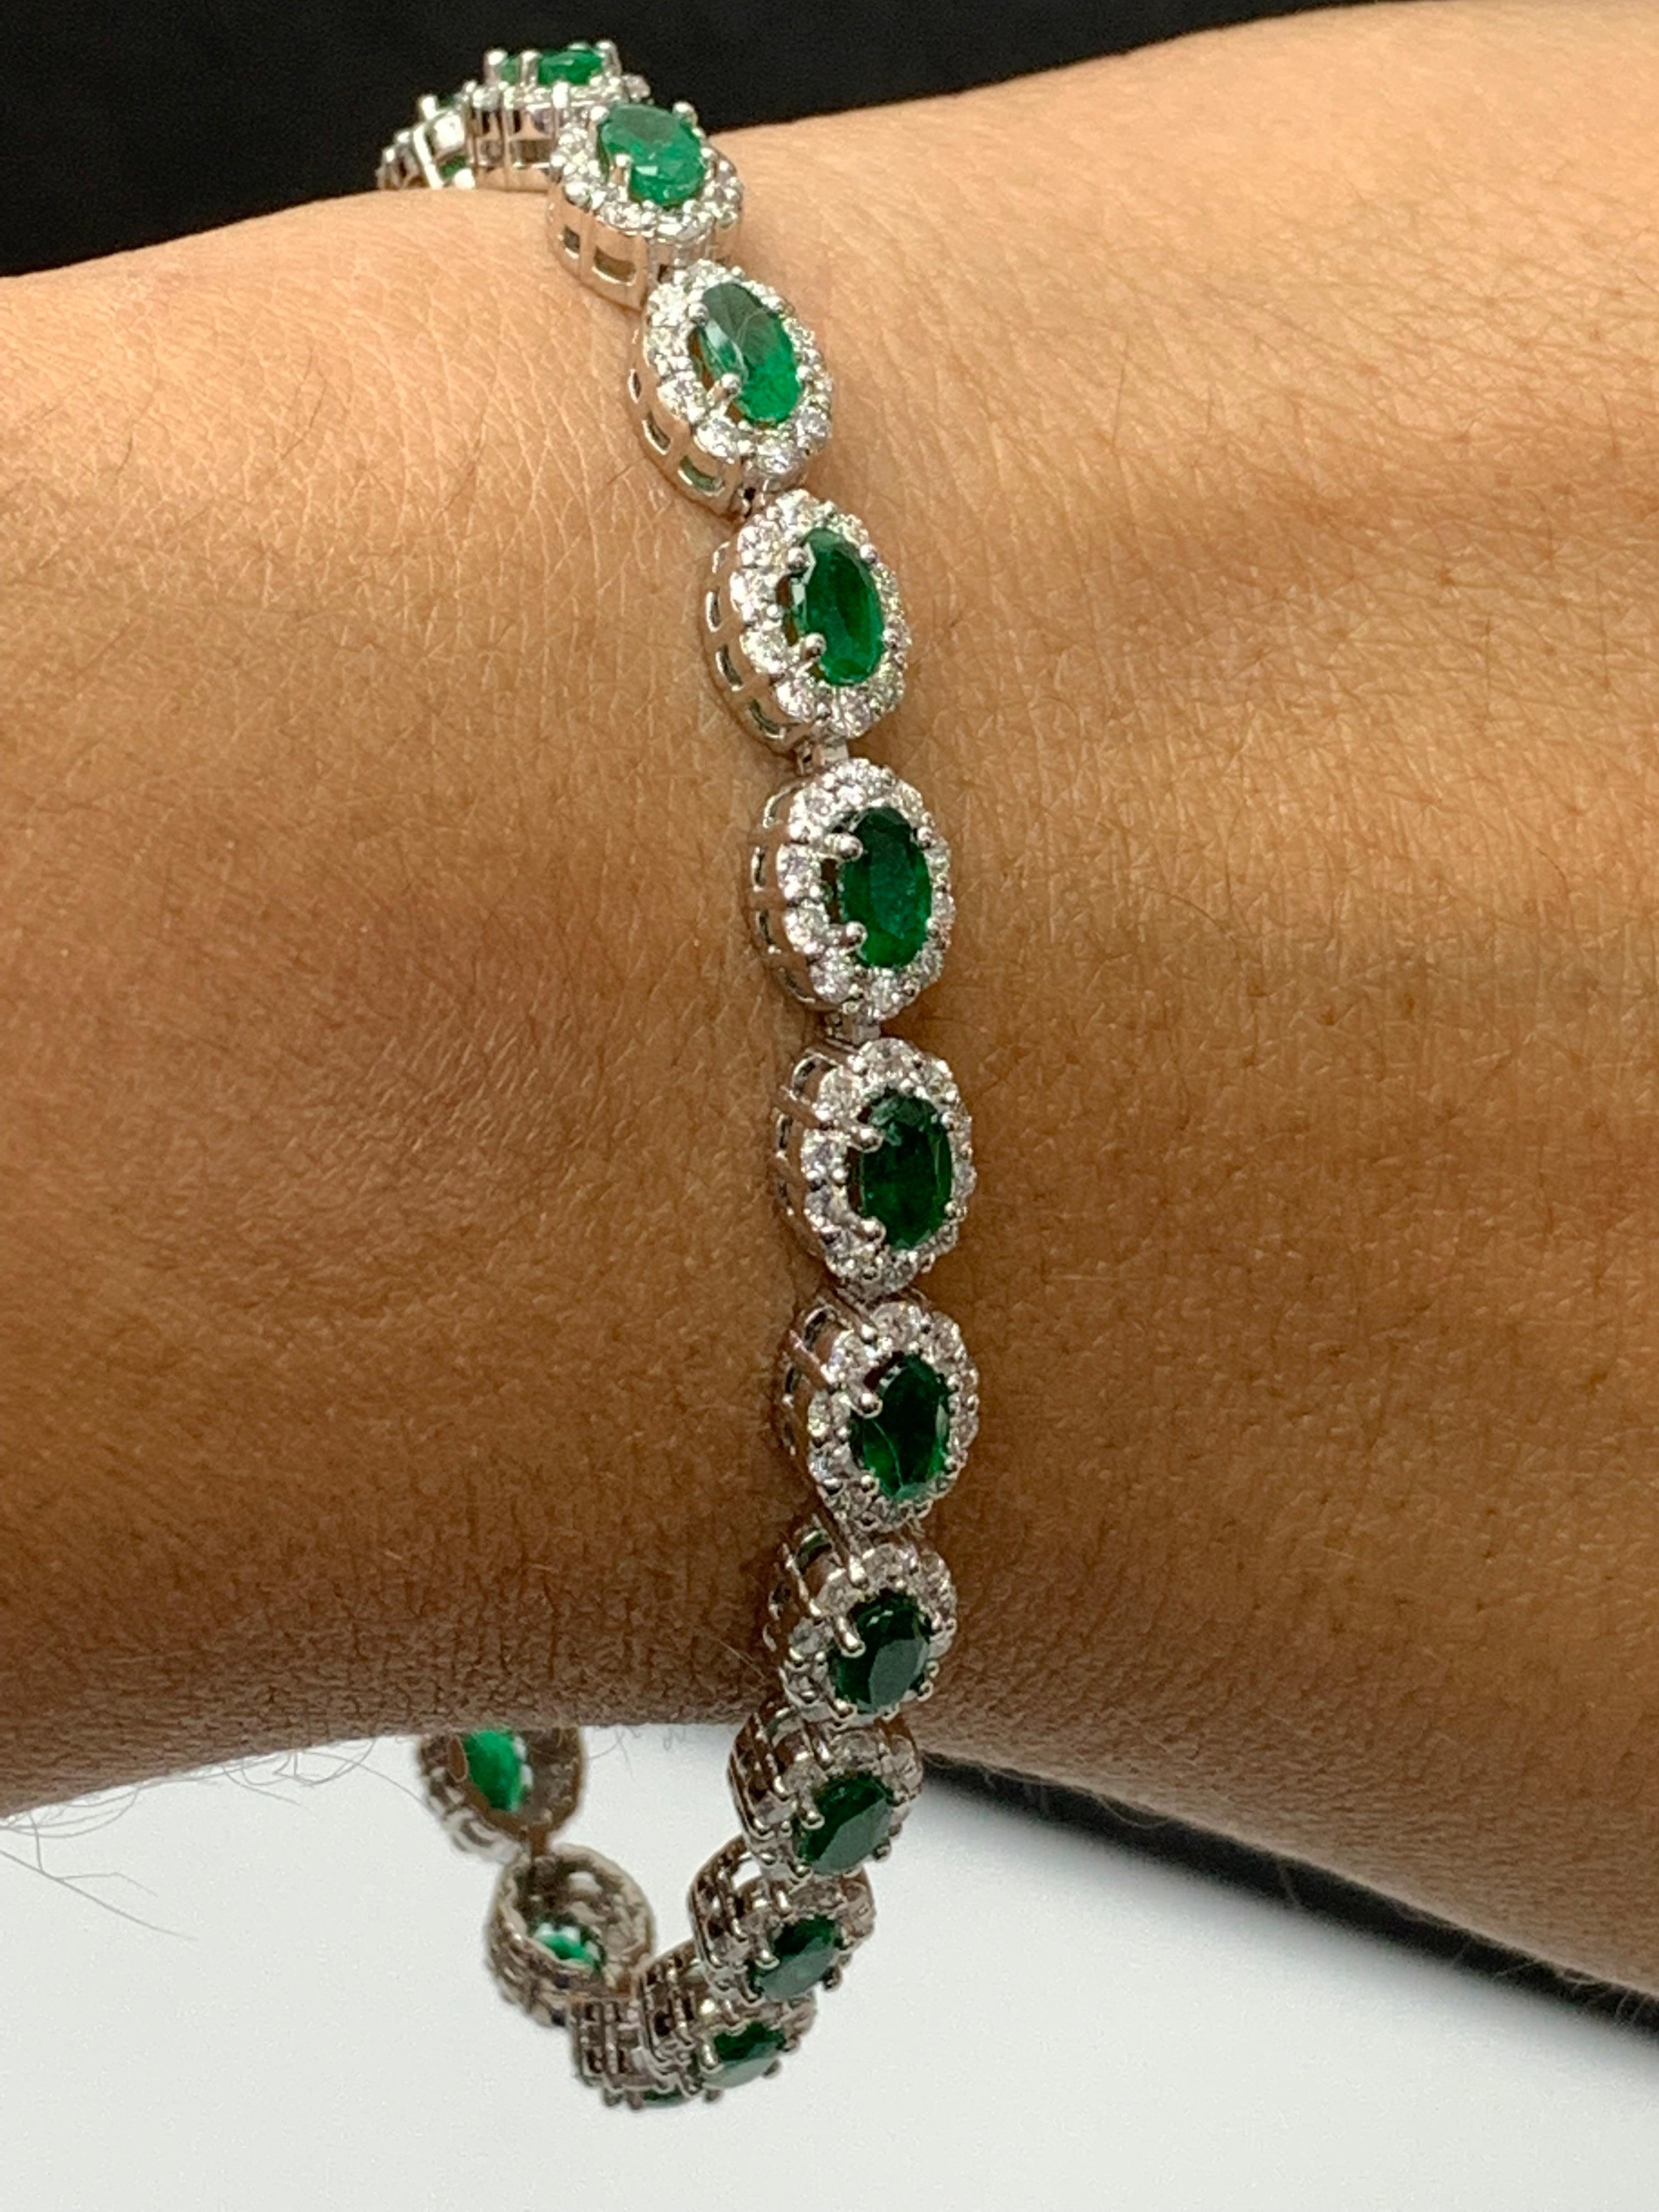 4.69 Carat Oval Cut Emerald and Diamond Halo Bracelet in 14K White Gold For Sale 4